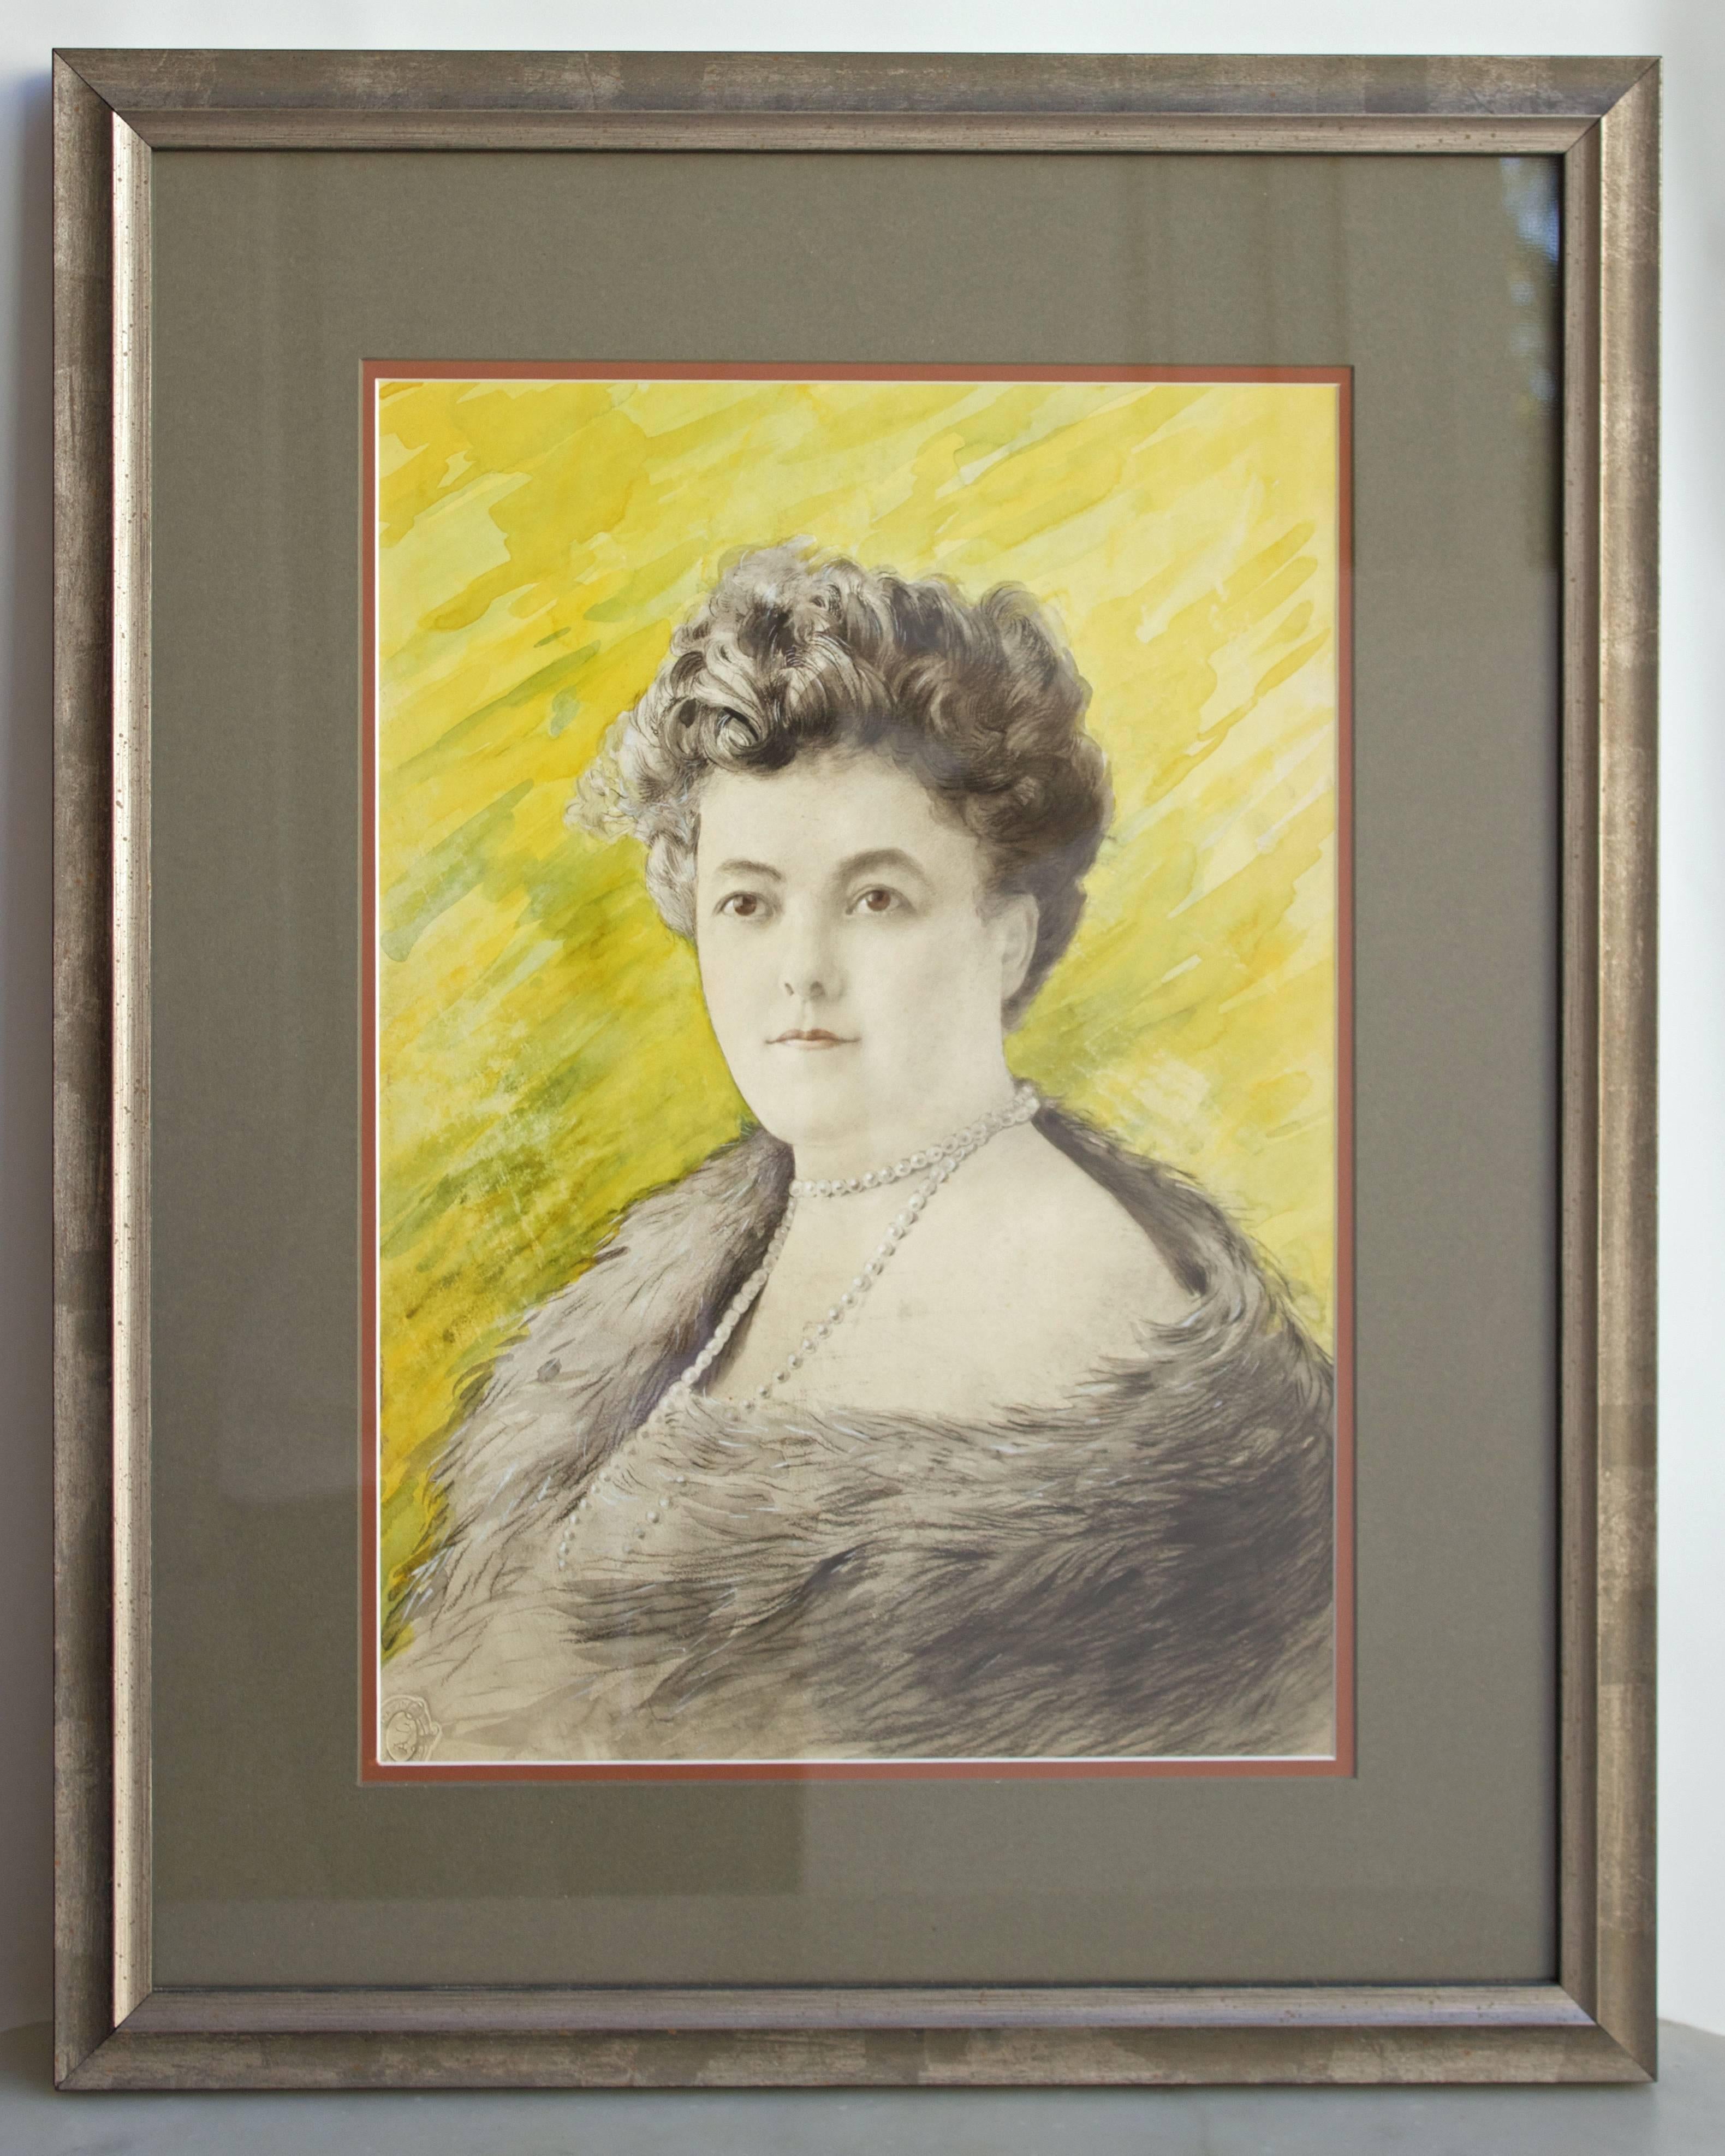 Truly beautiful portrait of this women attributed to E.C.A. Flament, French (1871-1943).